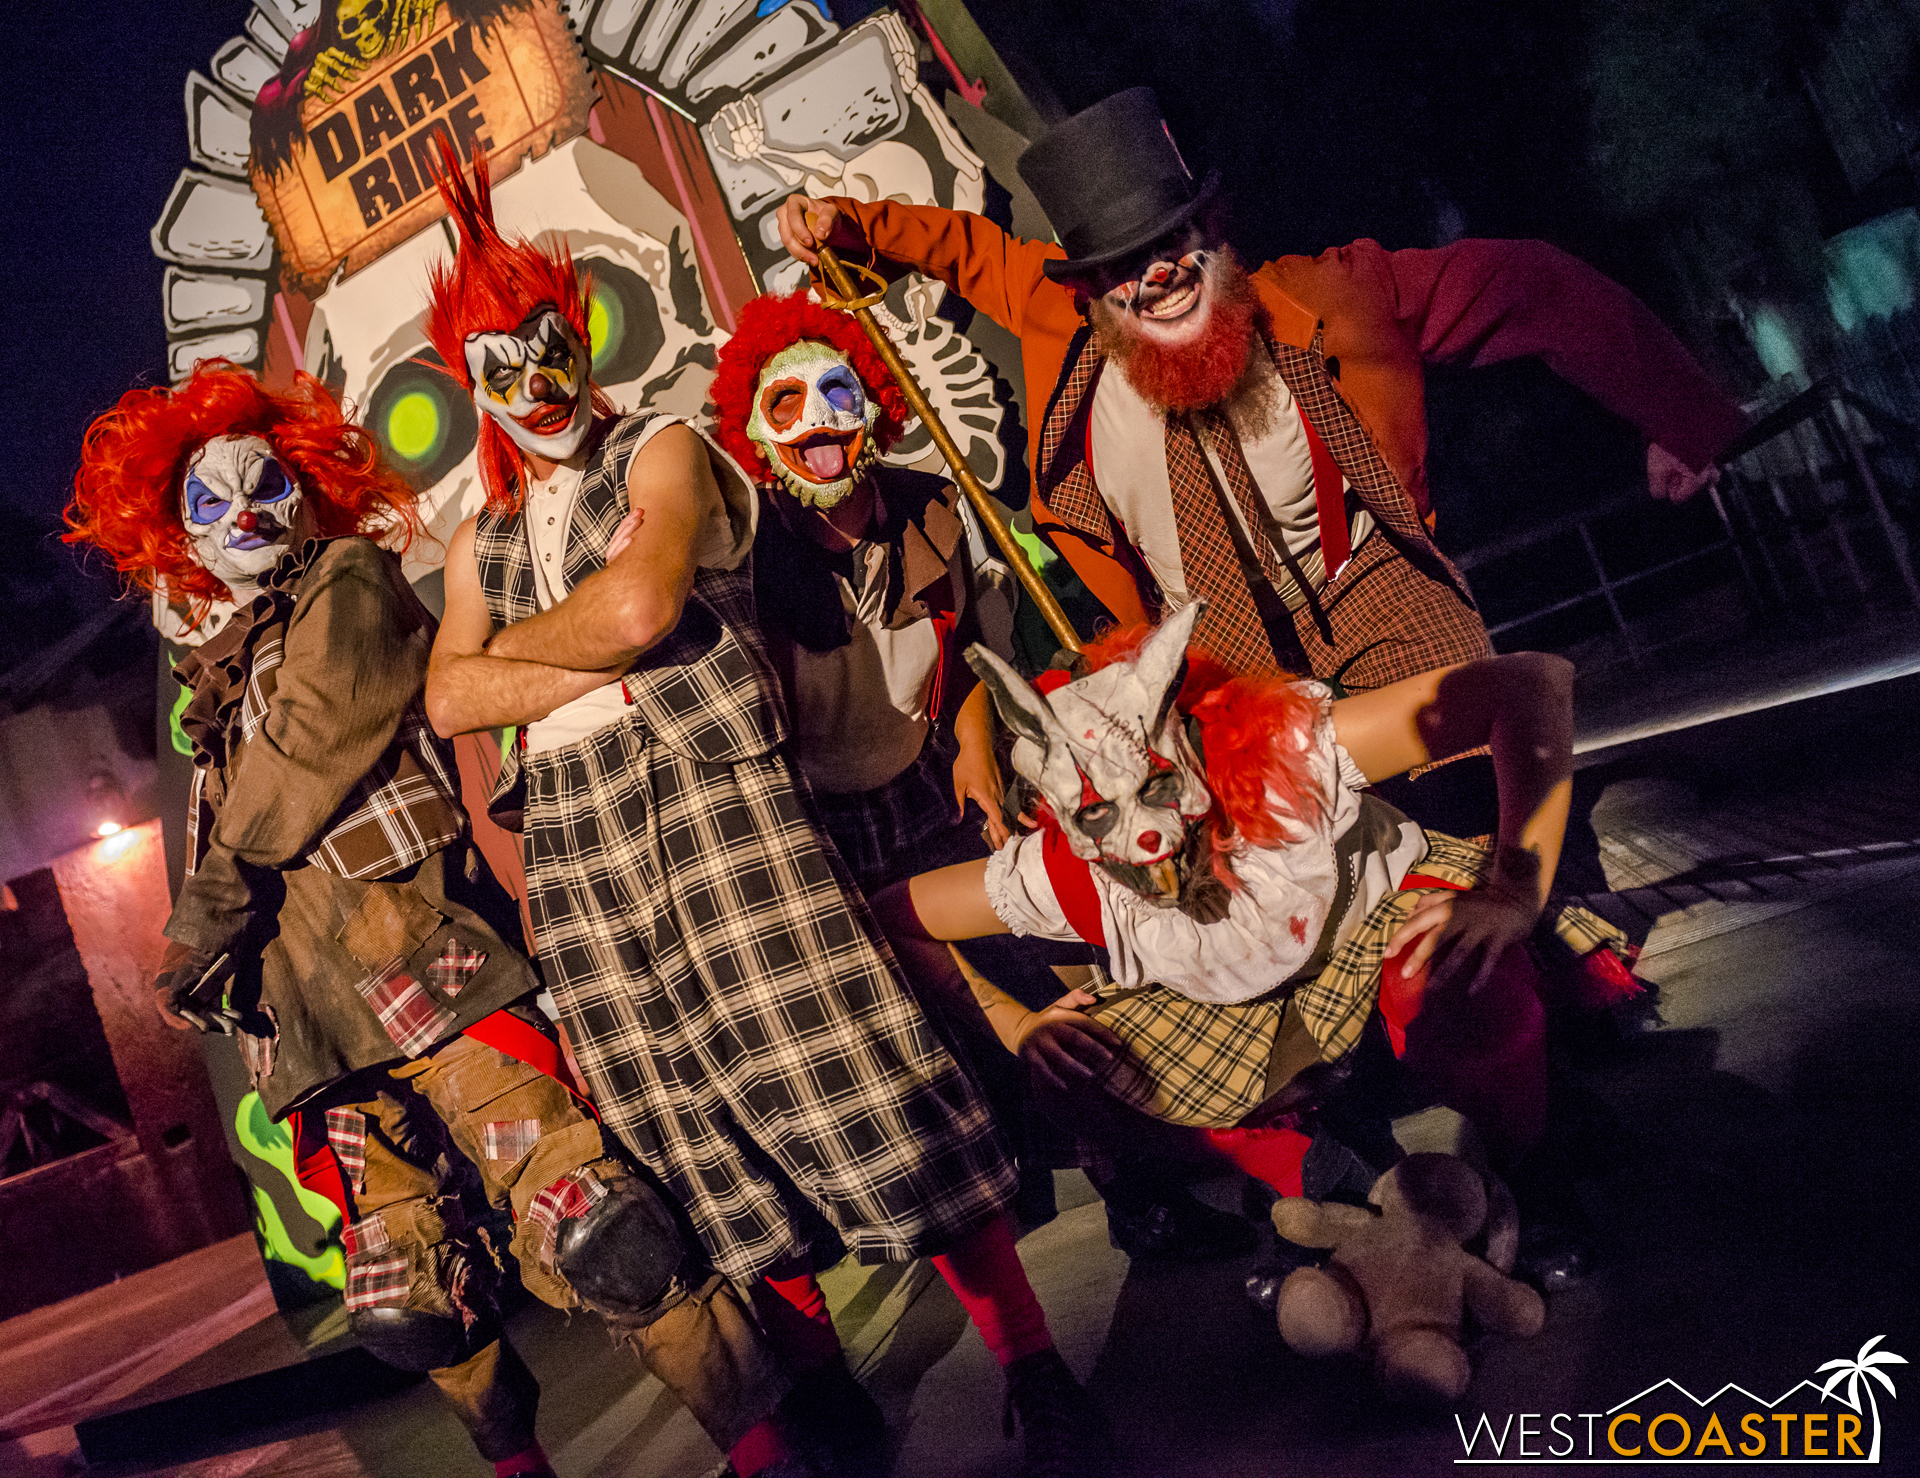  A gang of Carnevil clowns poses in front of the Dark Ride photo op backdrop. 